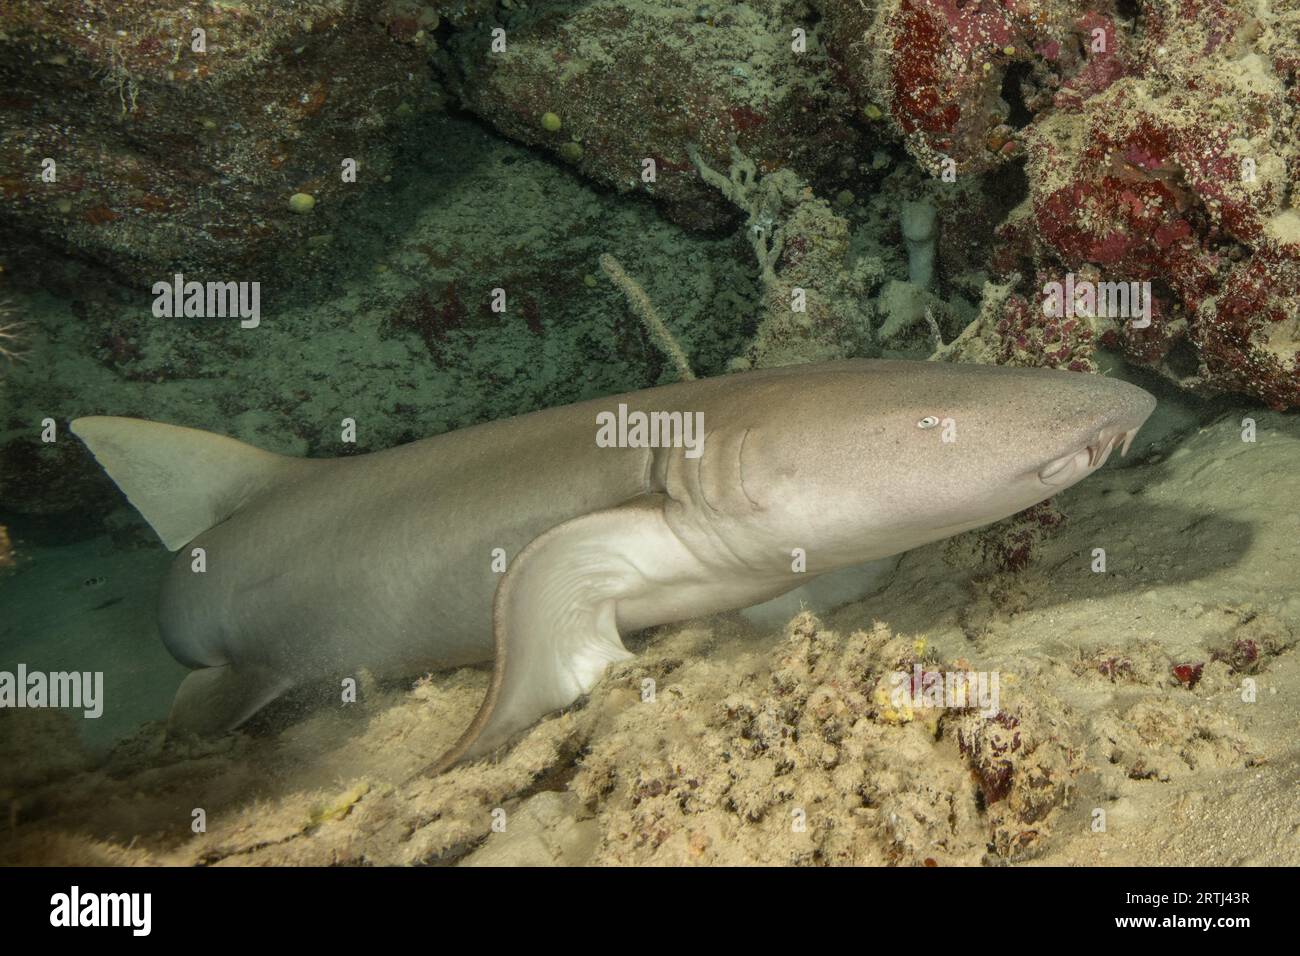 Nurse shark (Nebrius ferrugineus) lying in small grotto leaning on pectoral fin lifting upper body, Pacific Ocean, Yap Island, Yap State, Caroline Stock Photo